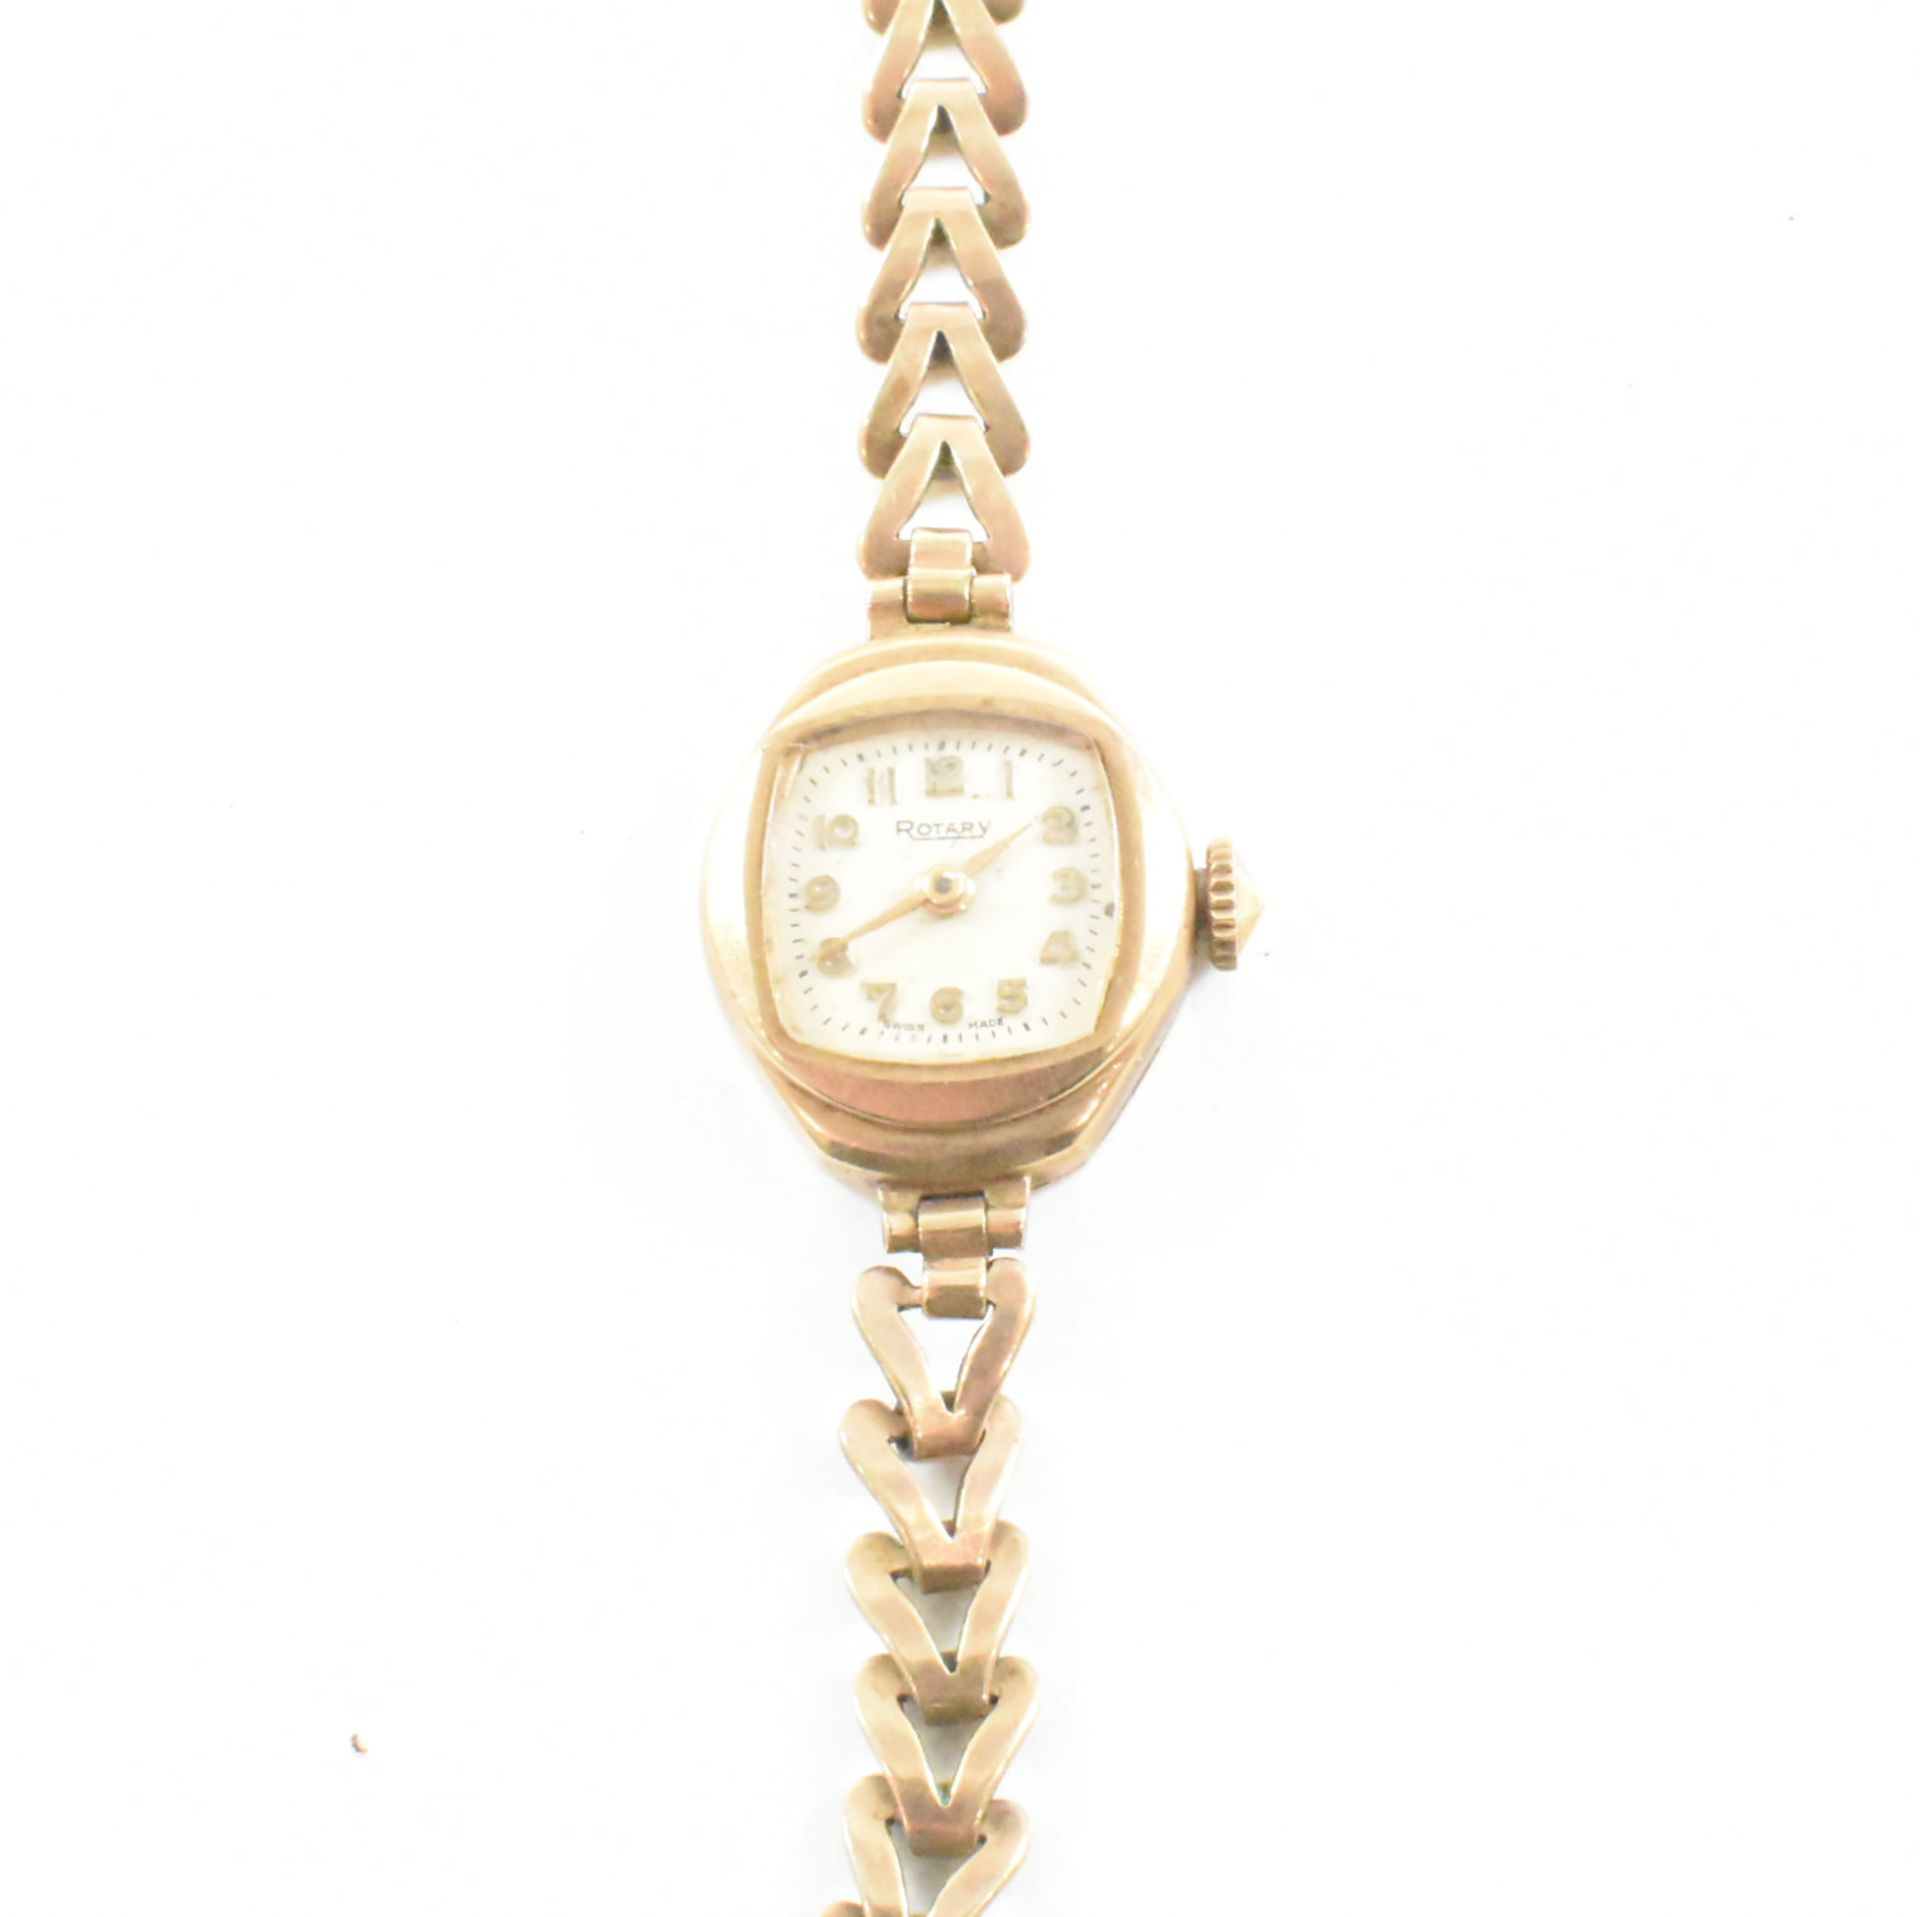 1960S HALLMARKED 9CT GOLD ROTARY WATCH WITH METAL LINED STRAP - Image 3 of 11